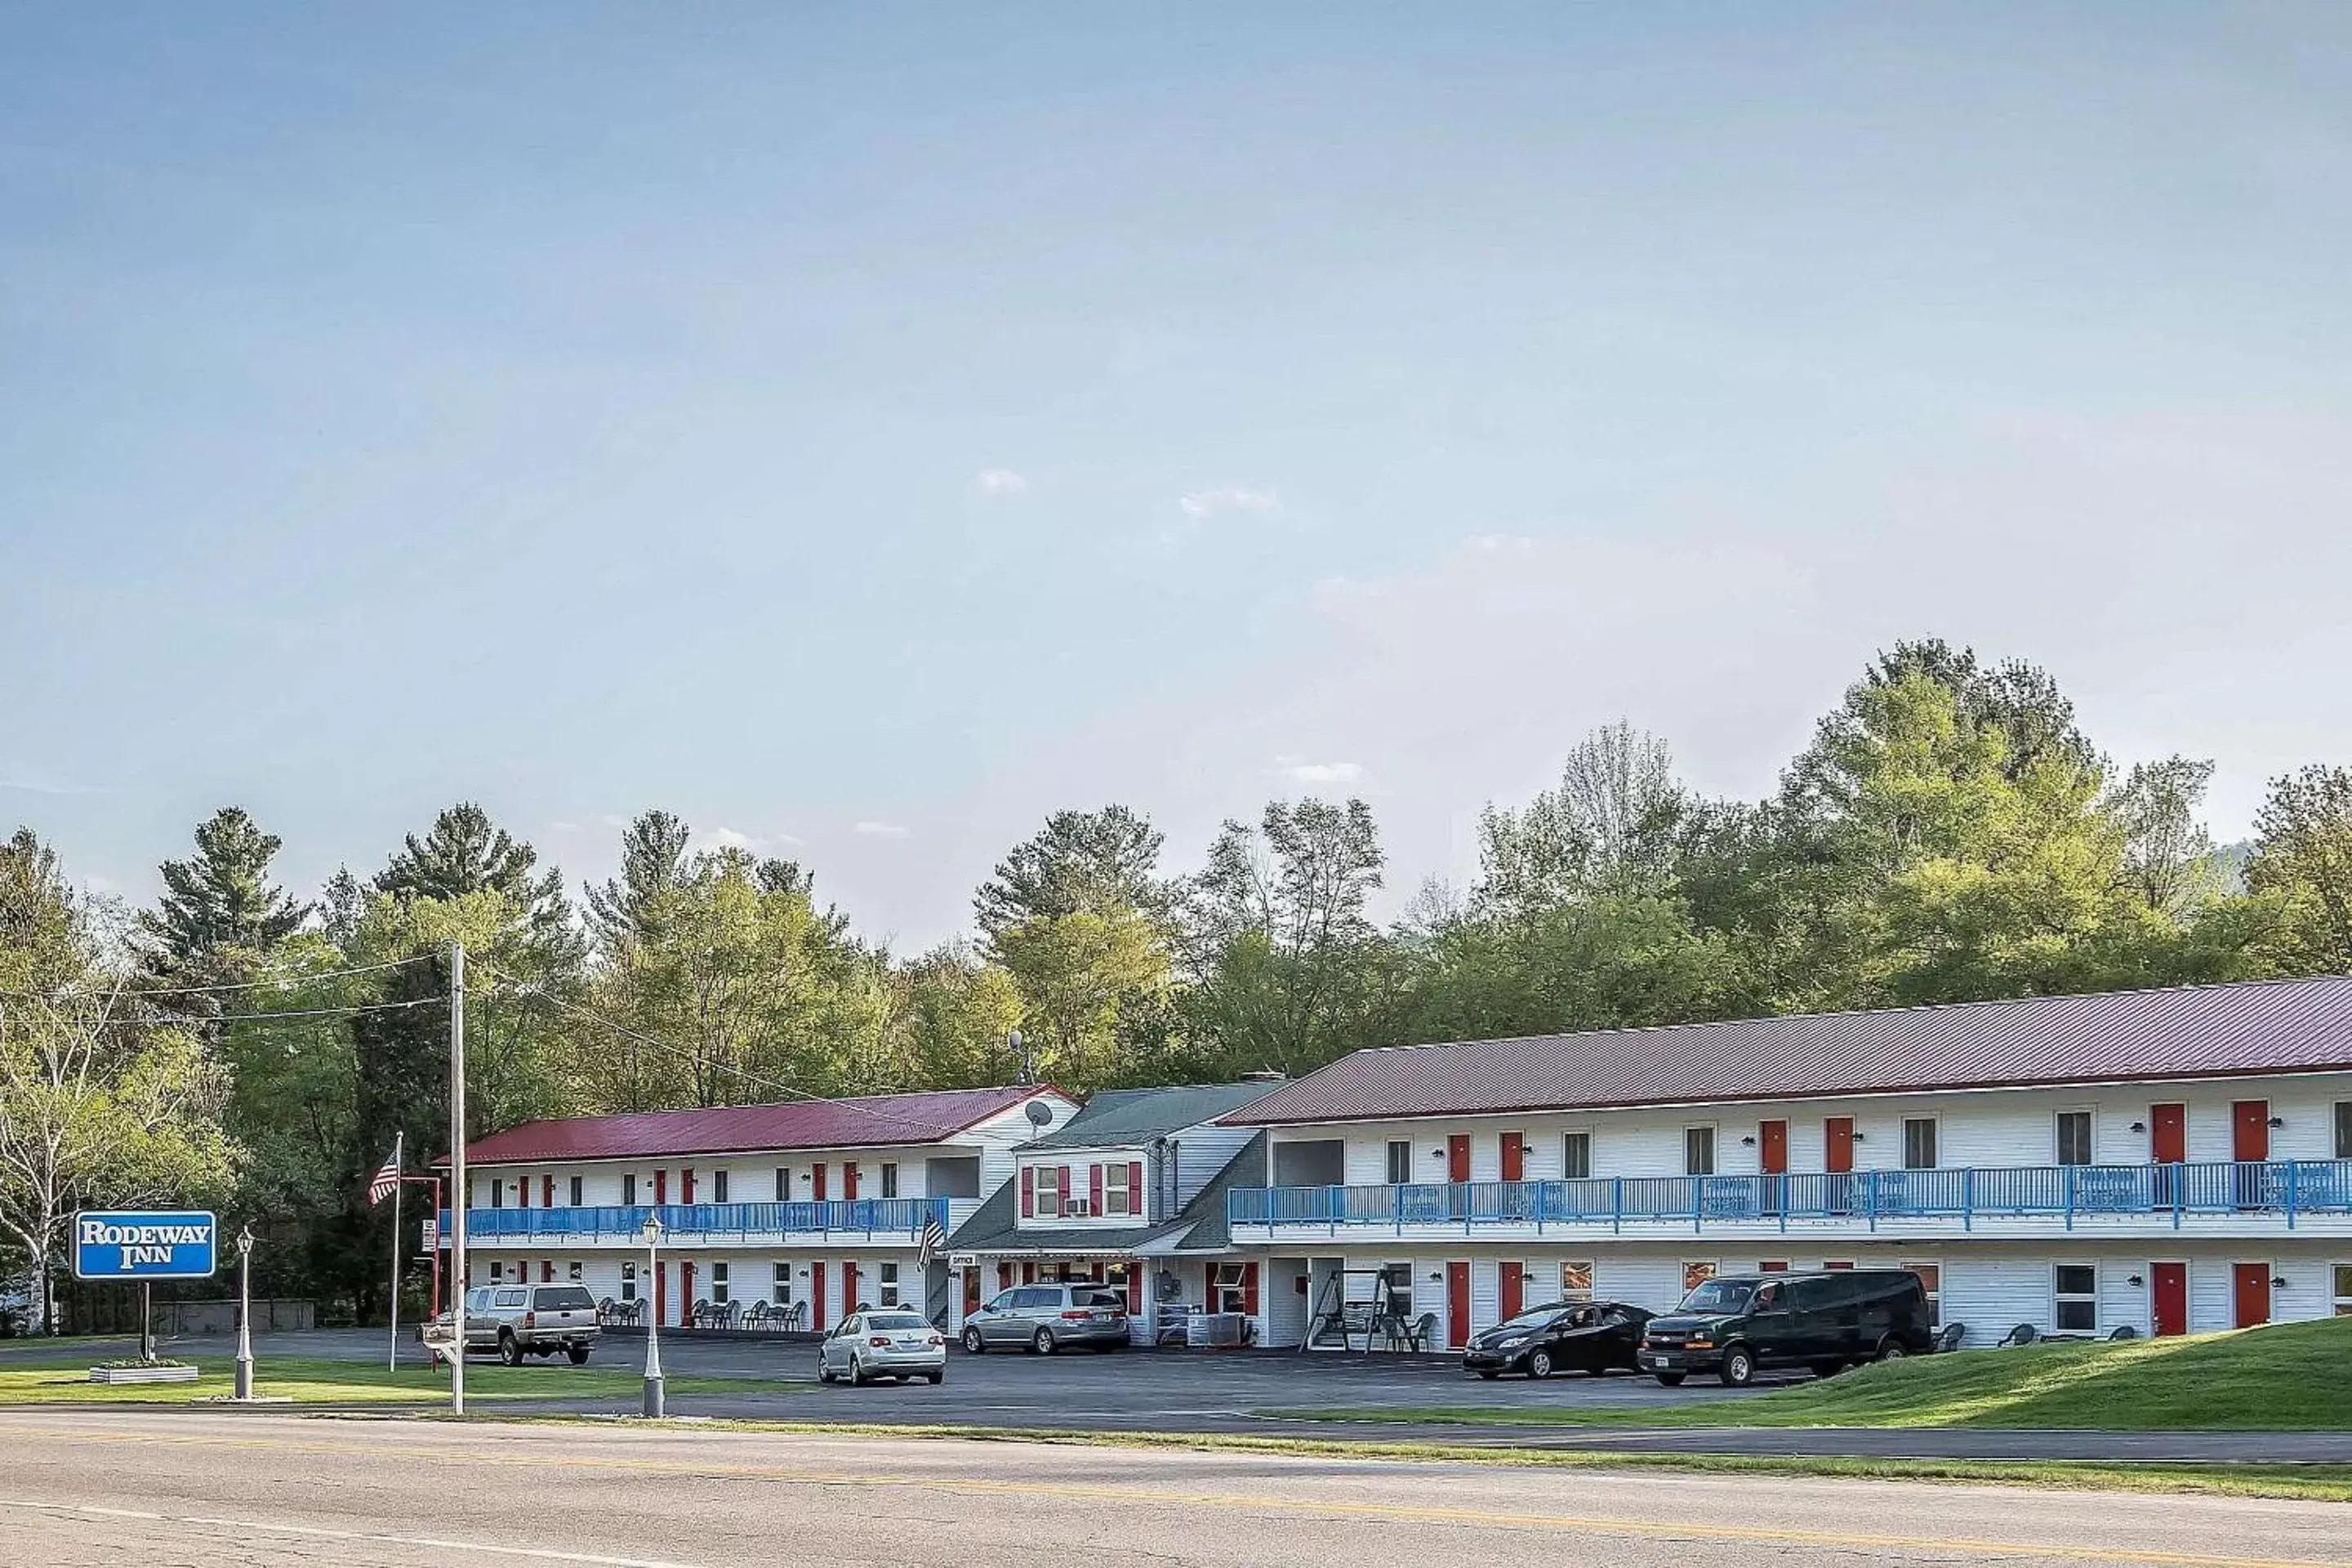 Property Building in Rodeway Inn Lincoln I-93